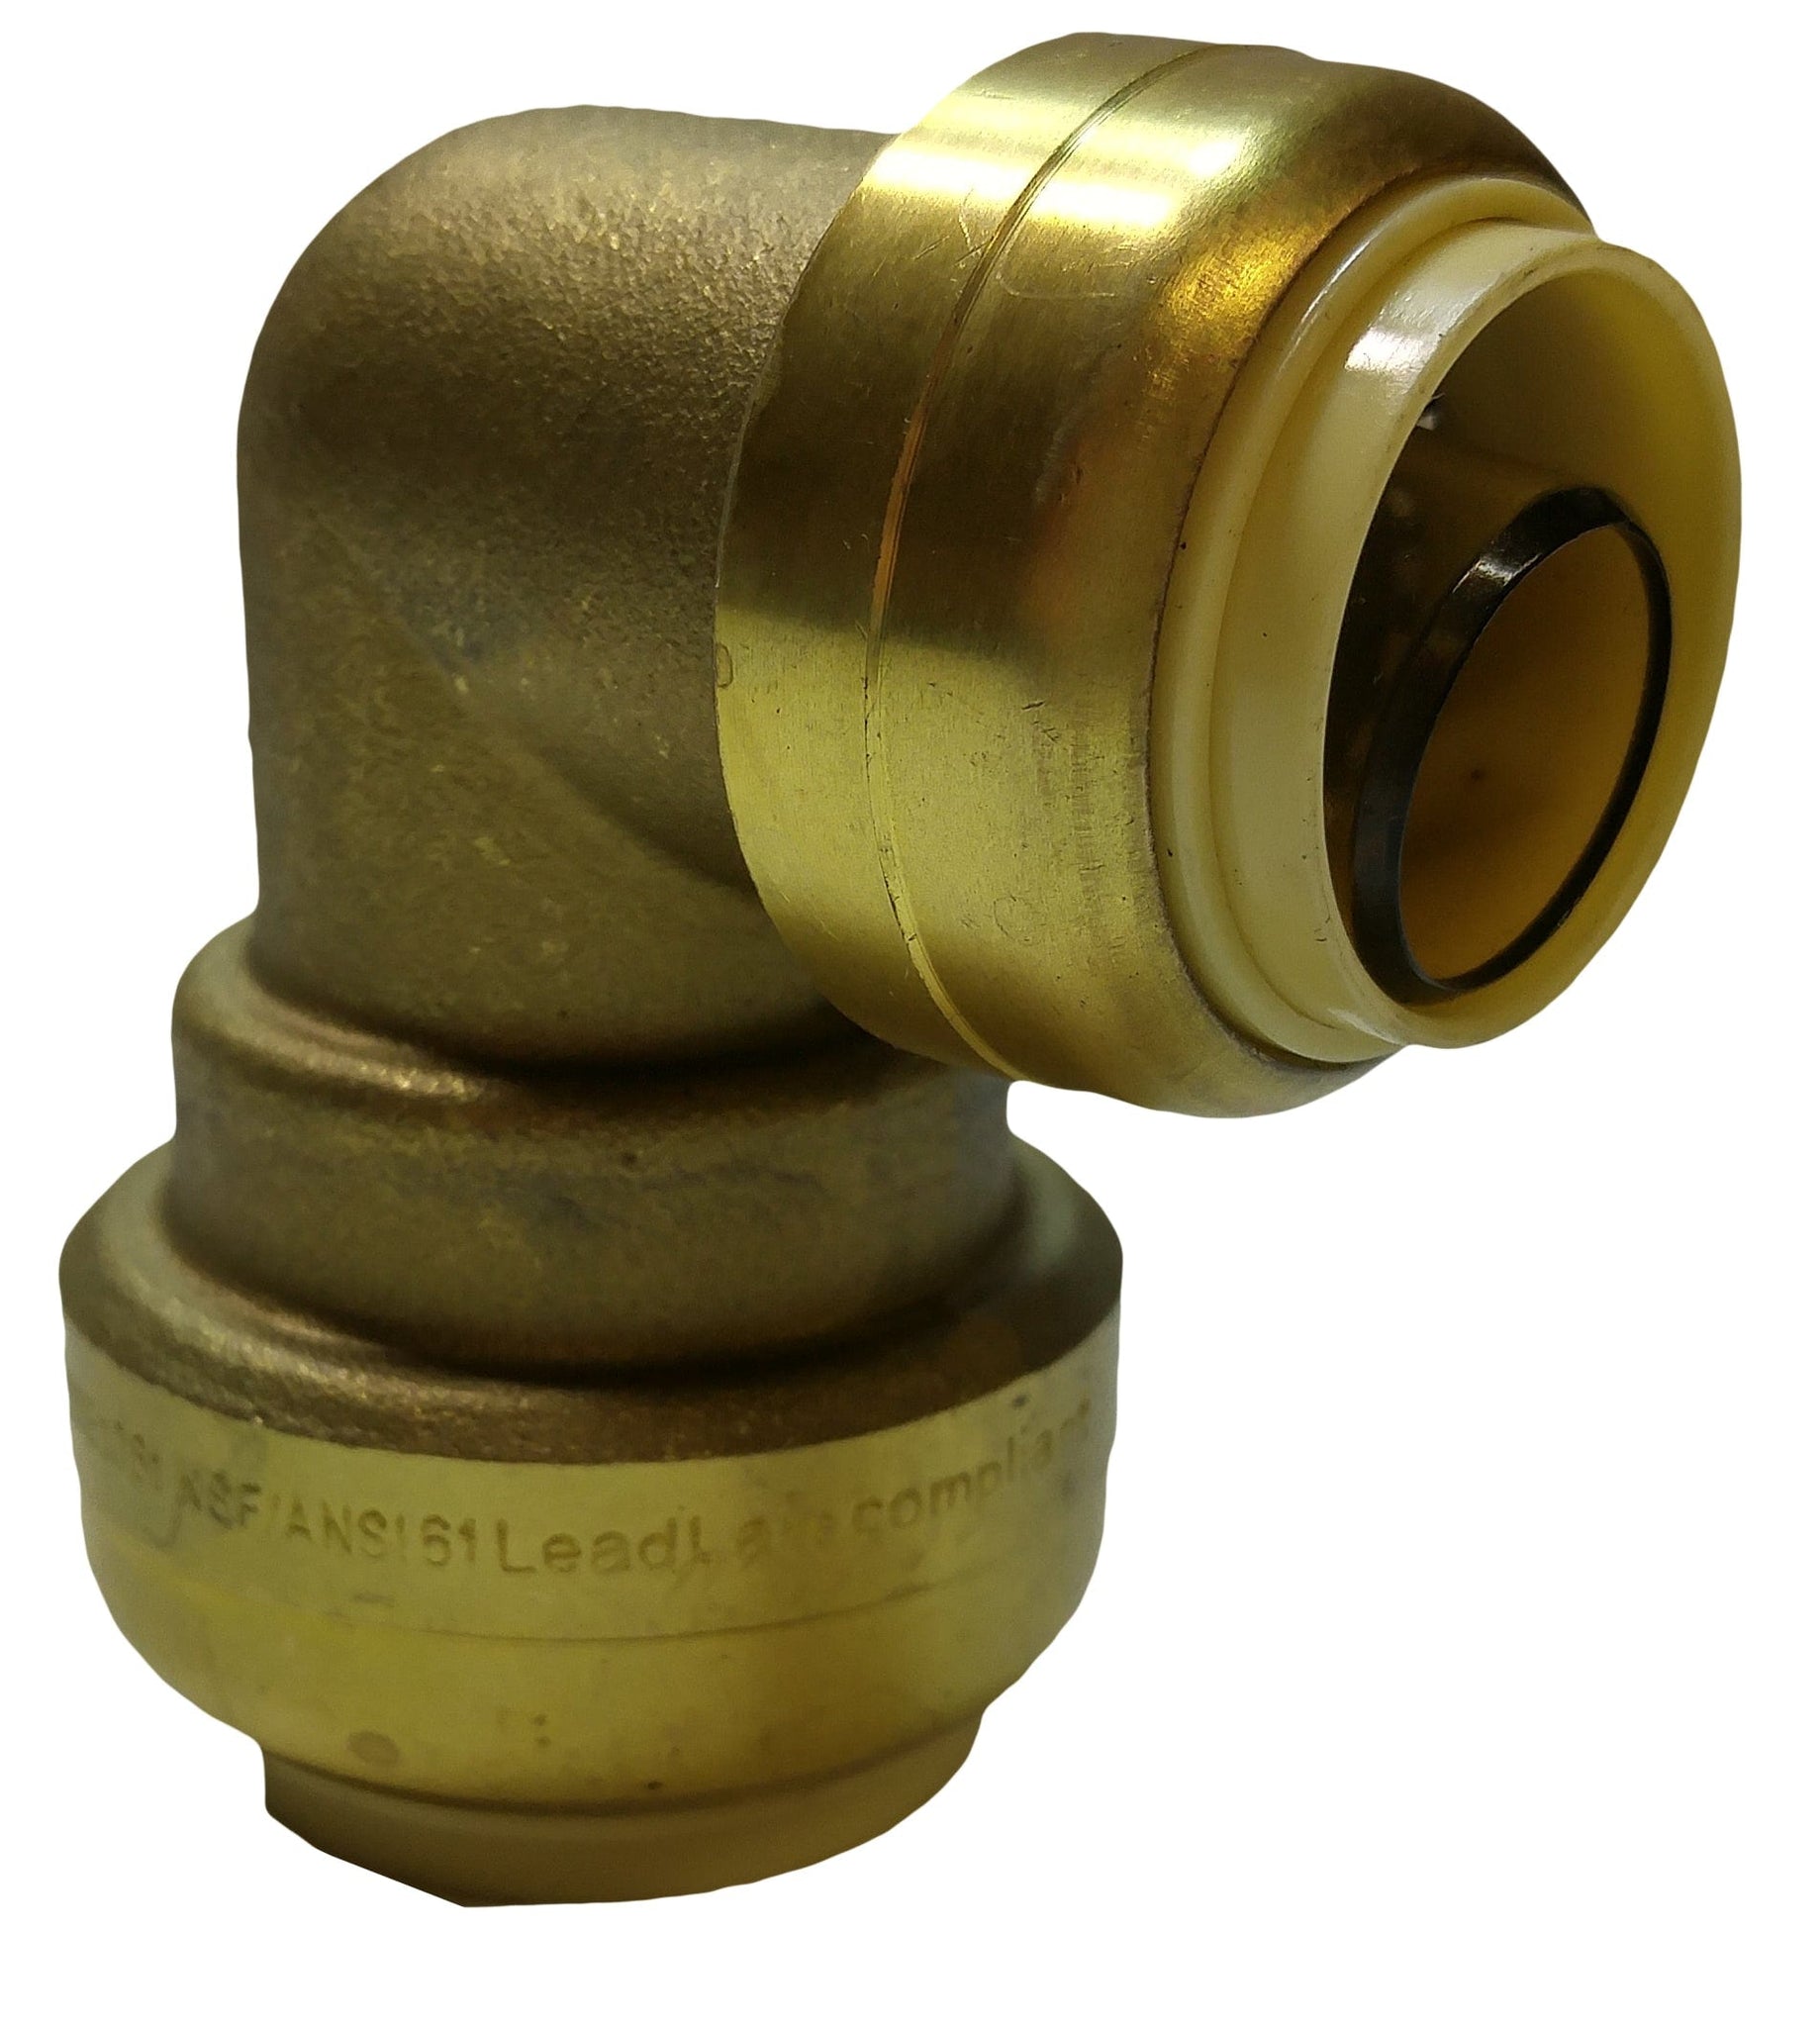 1/2" x 1/2" Push-Fit Fitting Elbow, Low Lead, NSF